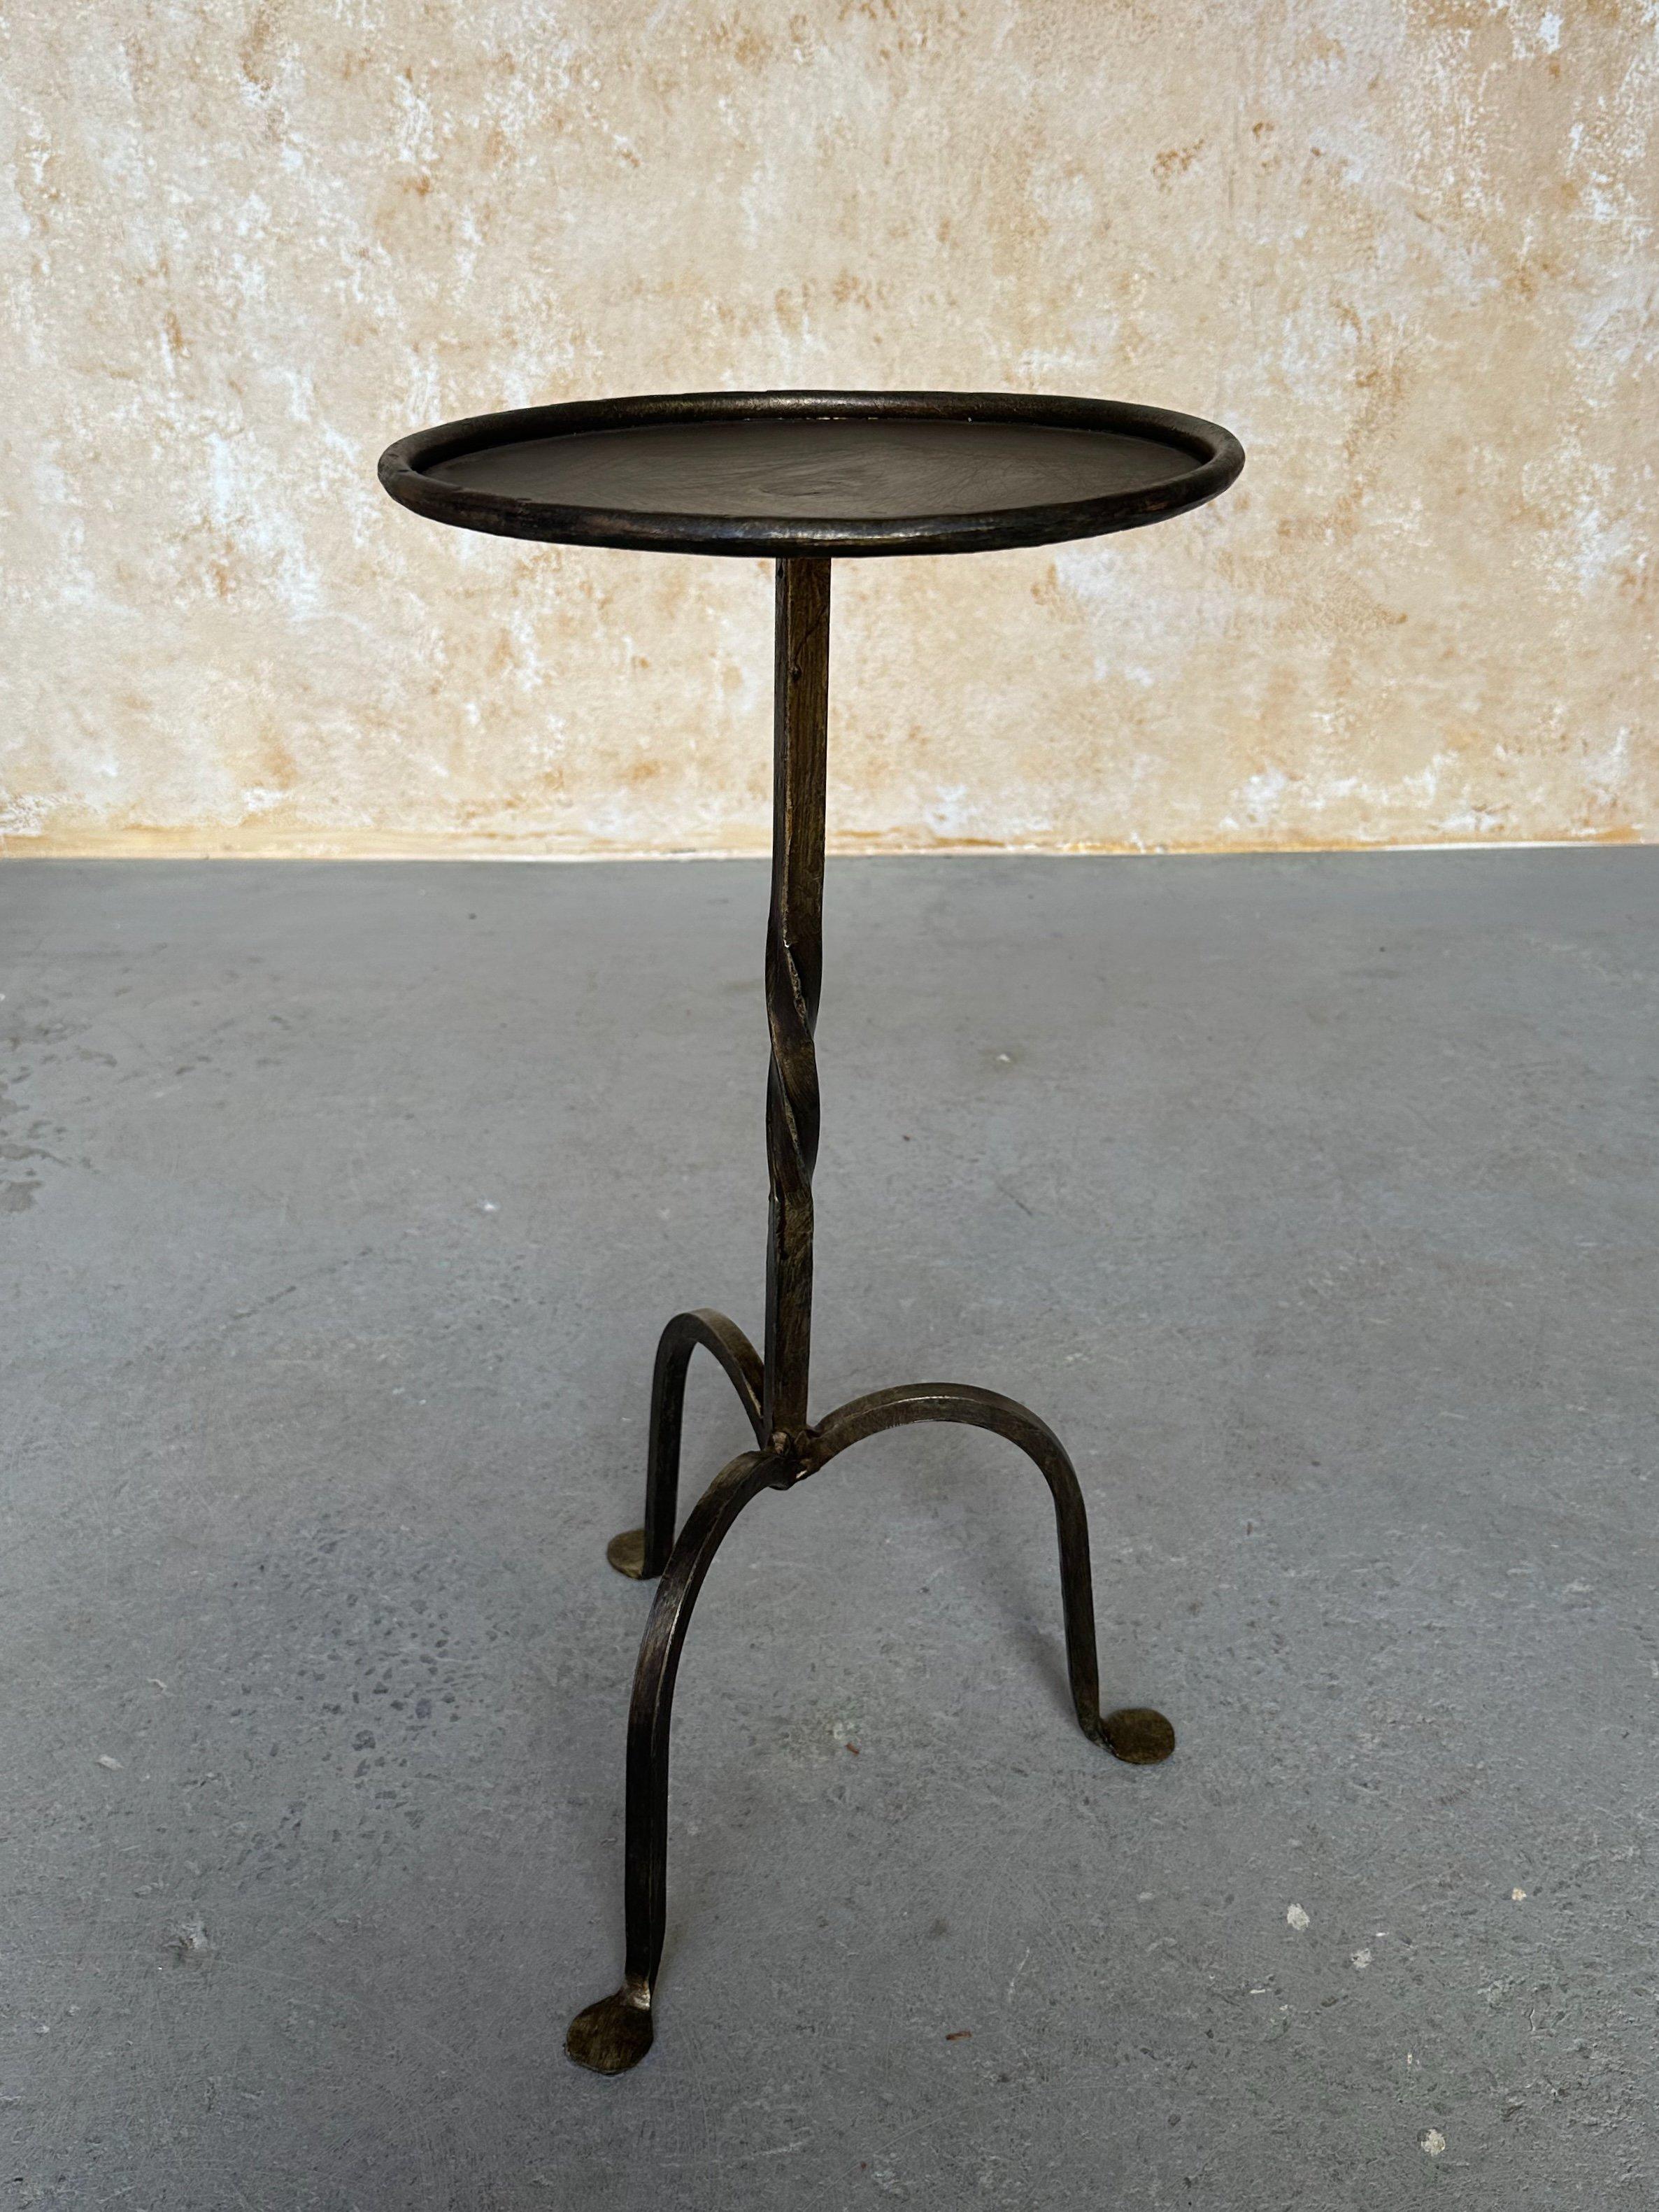 This small Spanish end table was recently created by accomplished European artisans using traditional iron-working methods. It features a central twisted stem detail and is mounted on a tripod base with gently splayed feet. Measuring 22.5 inches